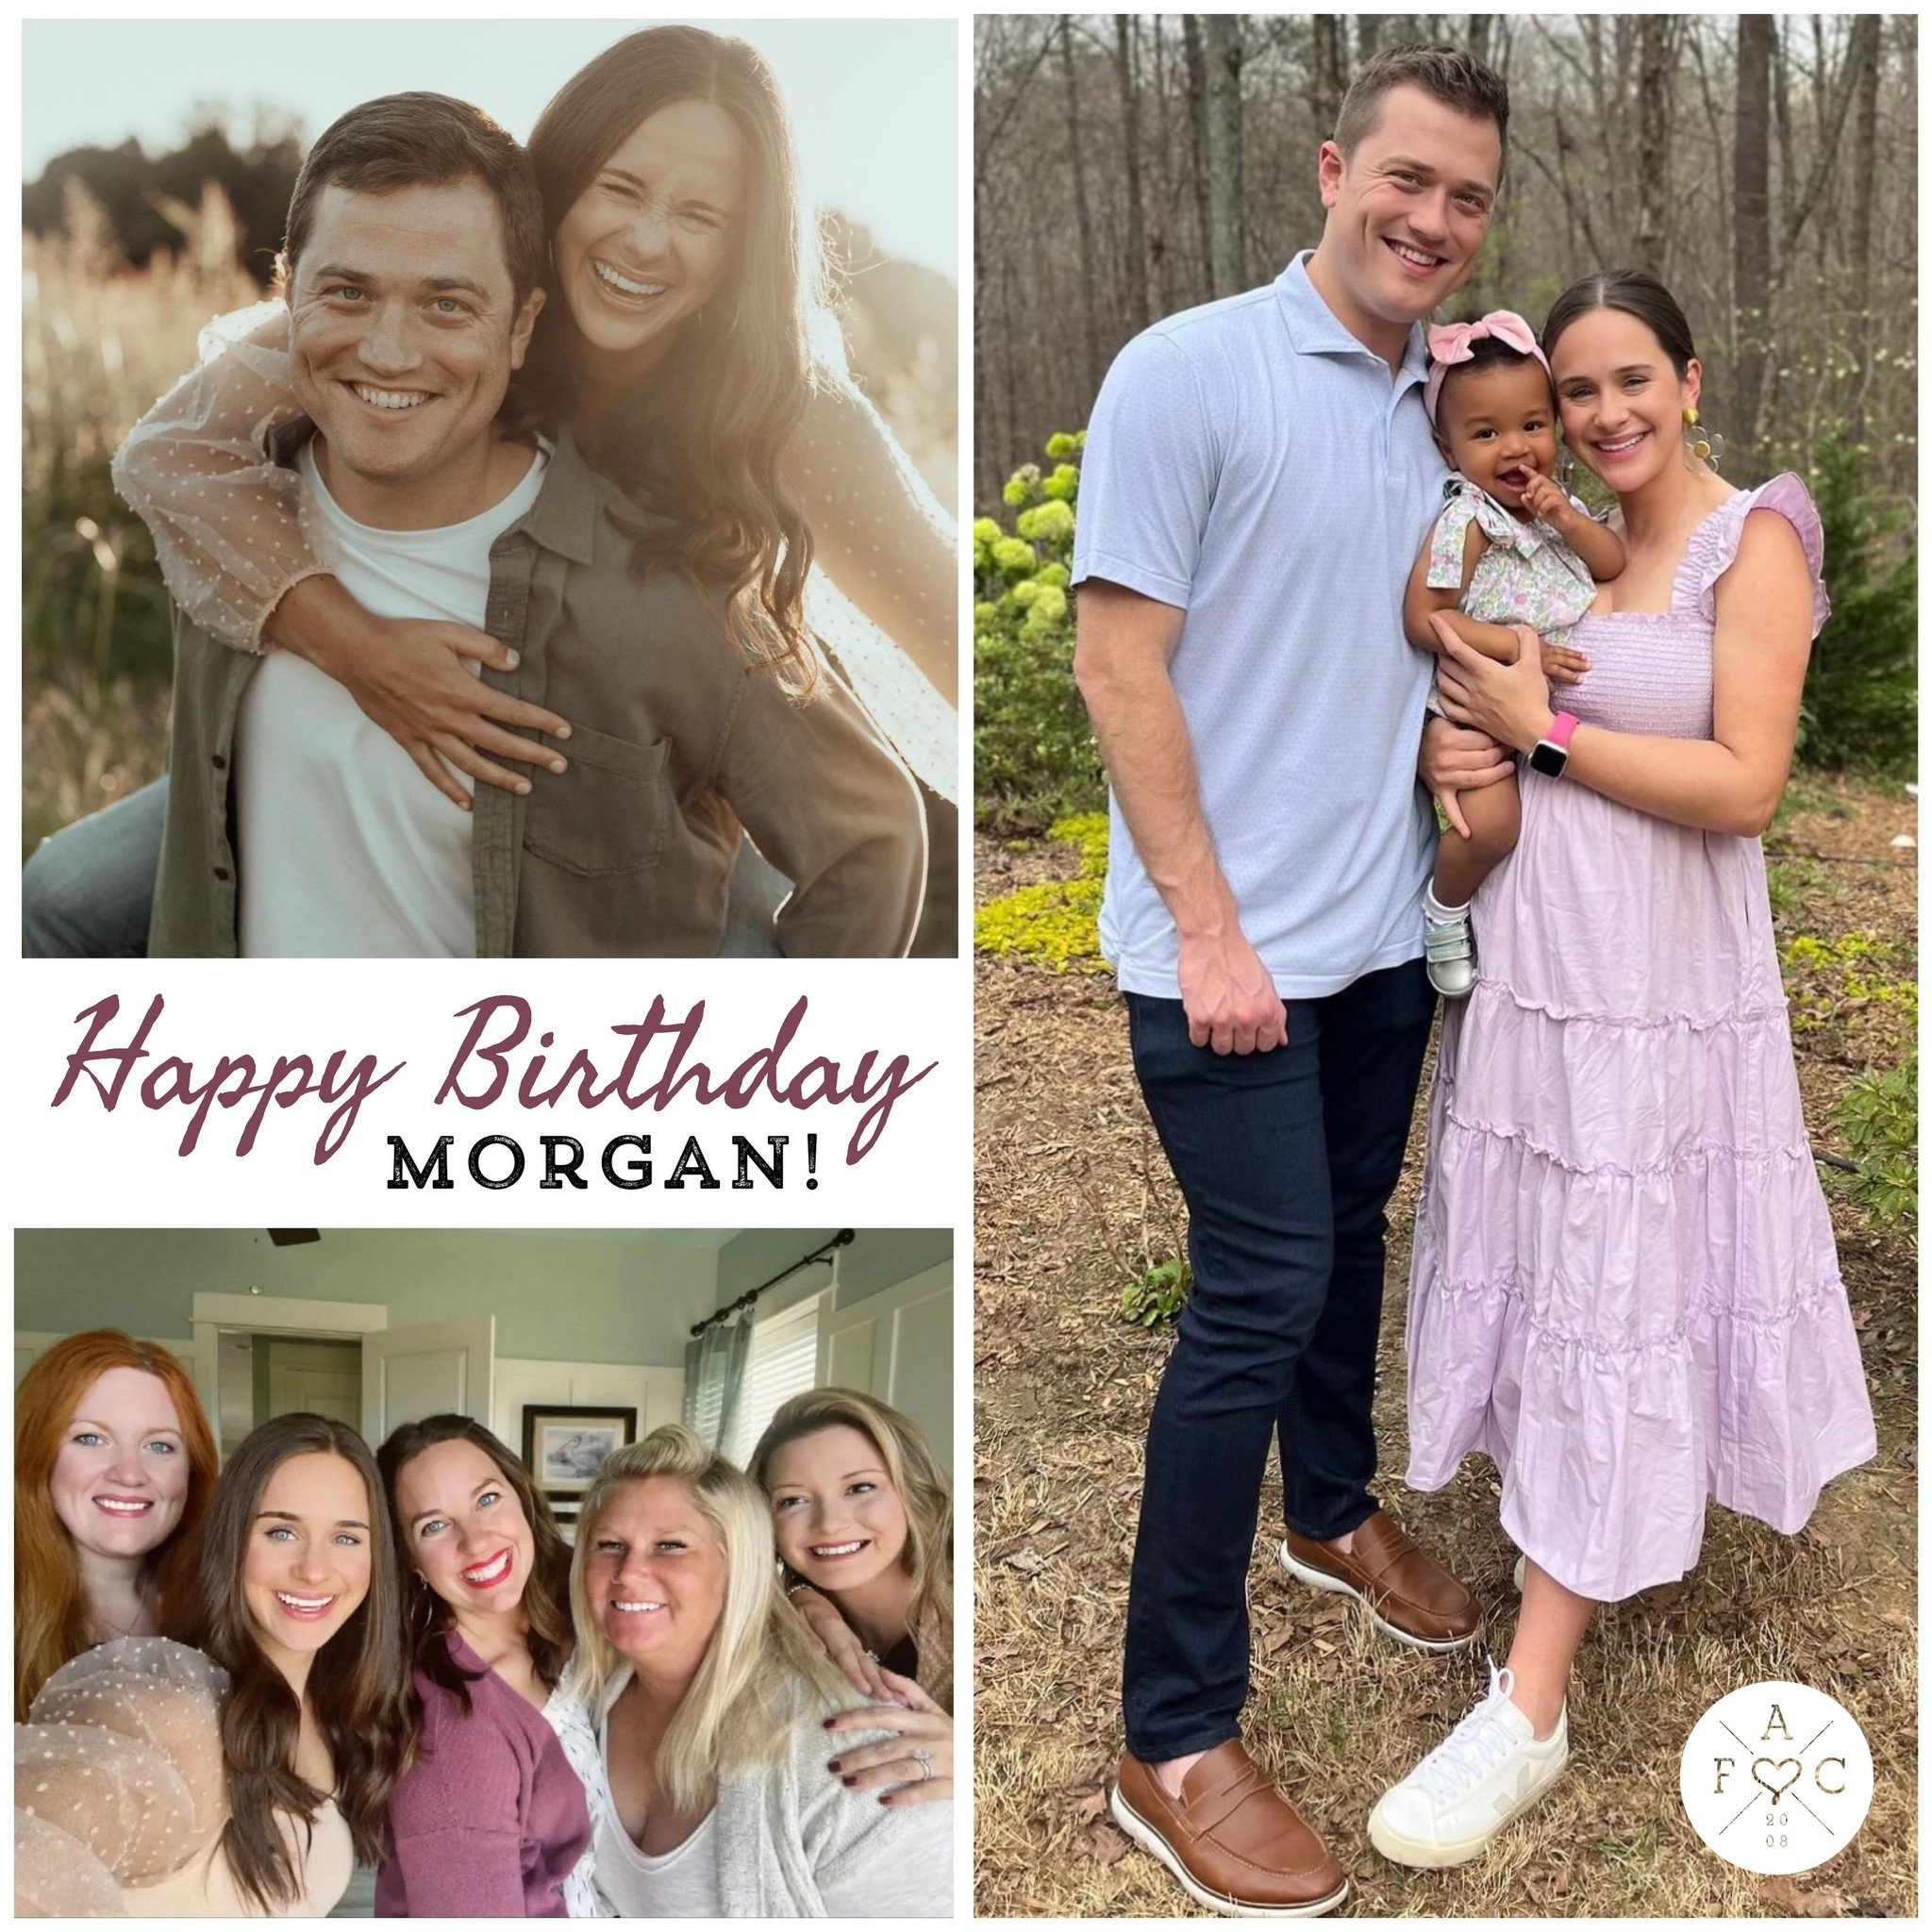 Eek! Today is Morgan&rsquo;s birthday! @morg_rasmussen we hope you had the best day celebrating you! We all love you so much and we are so thankful for you and all that you are to our team and FAC families. 🥳